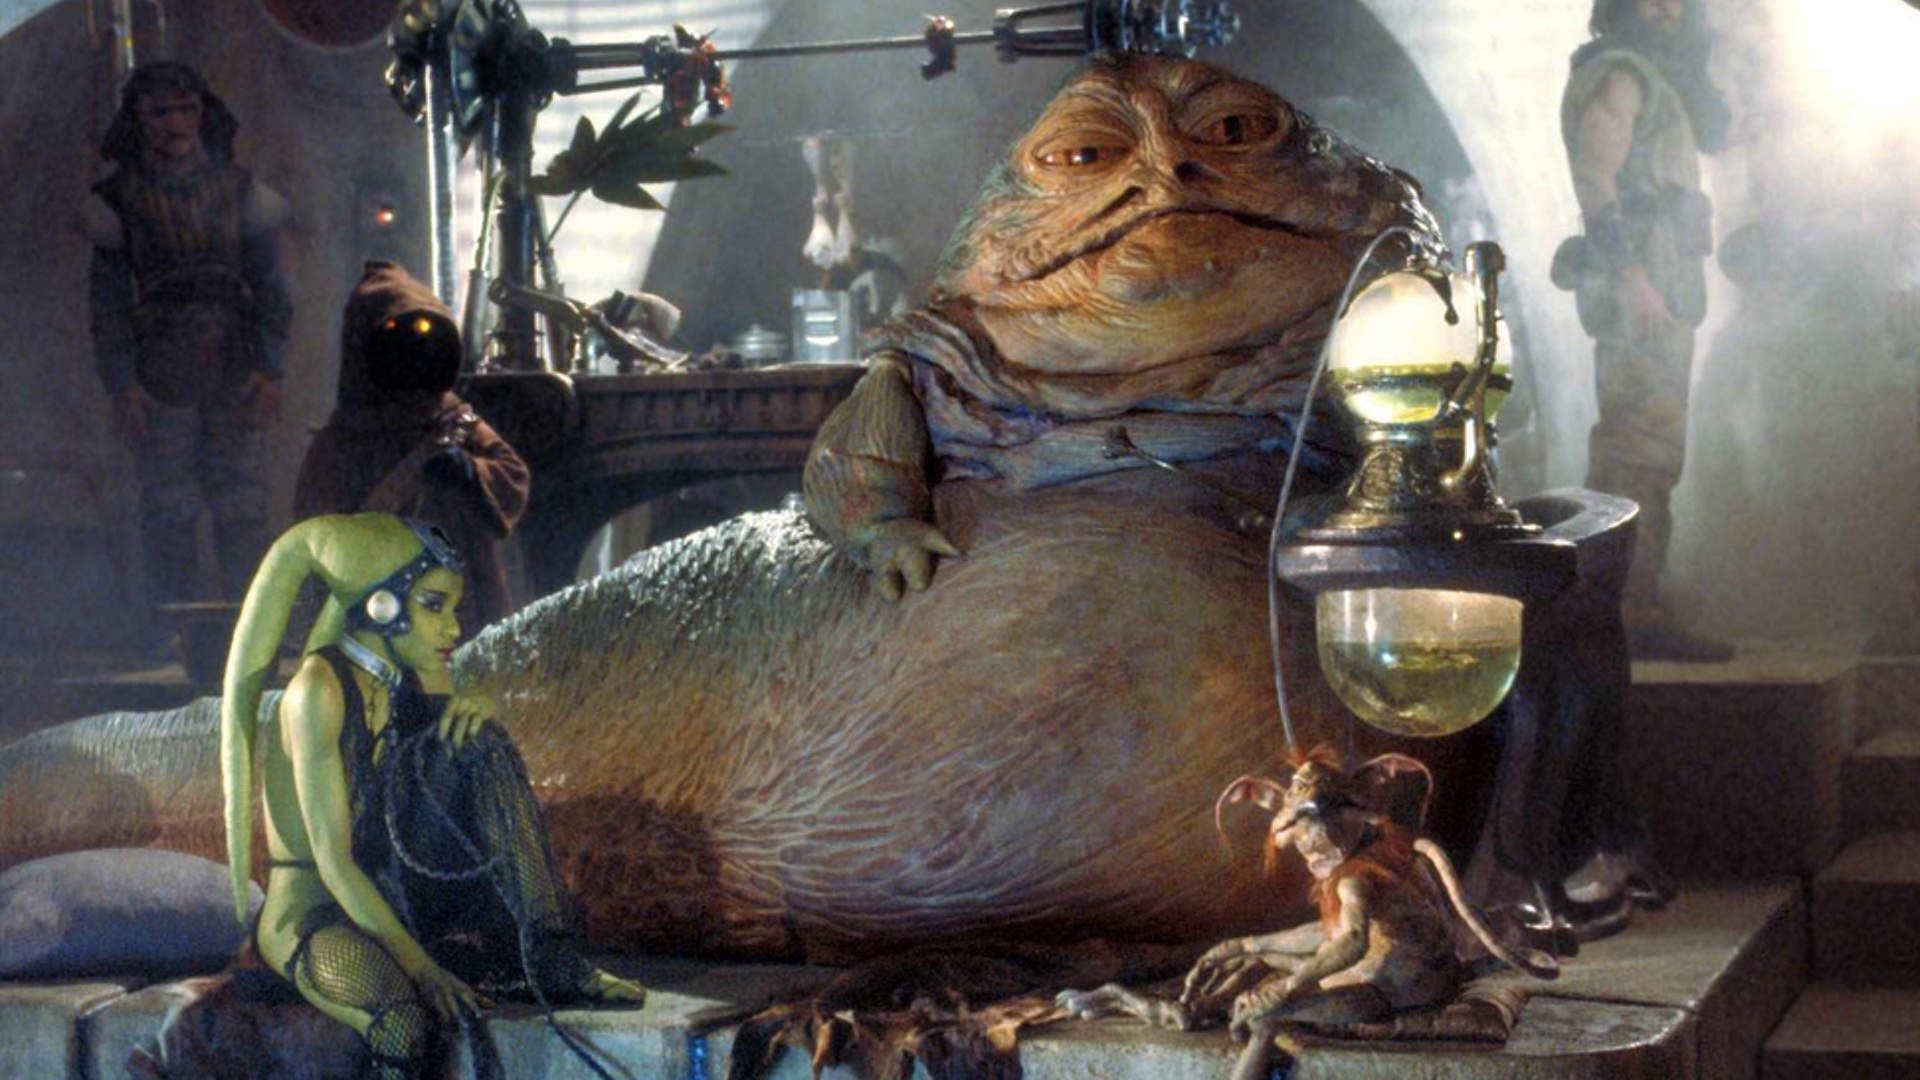 theres-also-a-jabba-the-hutt-star-wars-spinoff-film-in-development-at-lucasfilm-social.jpg